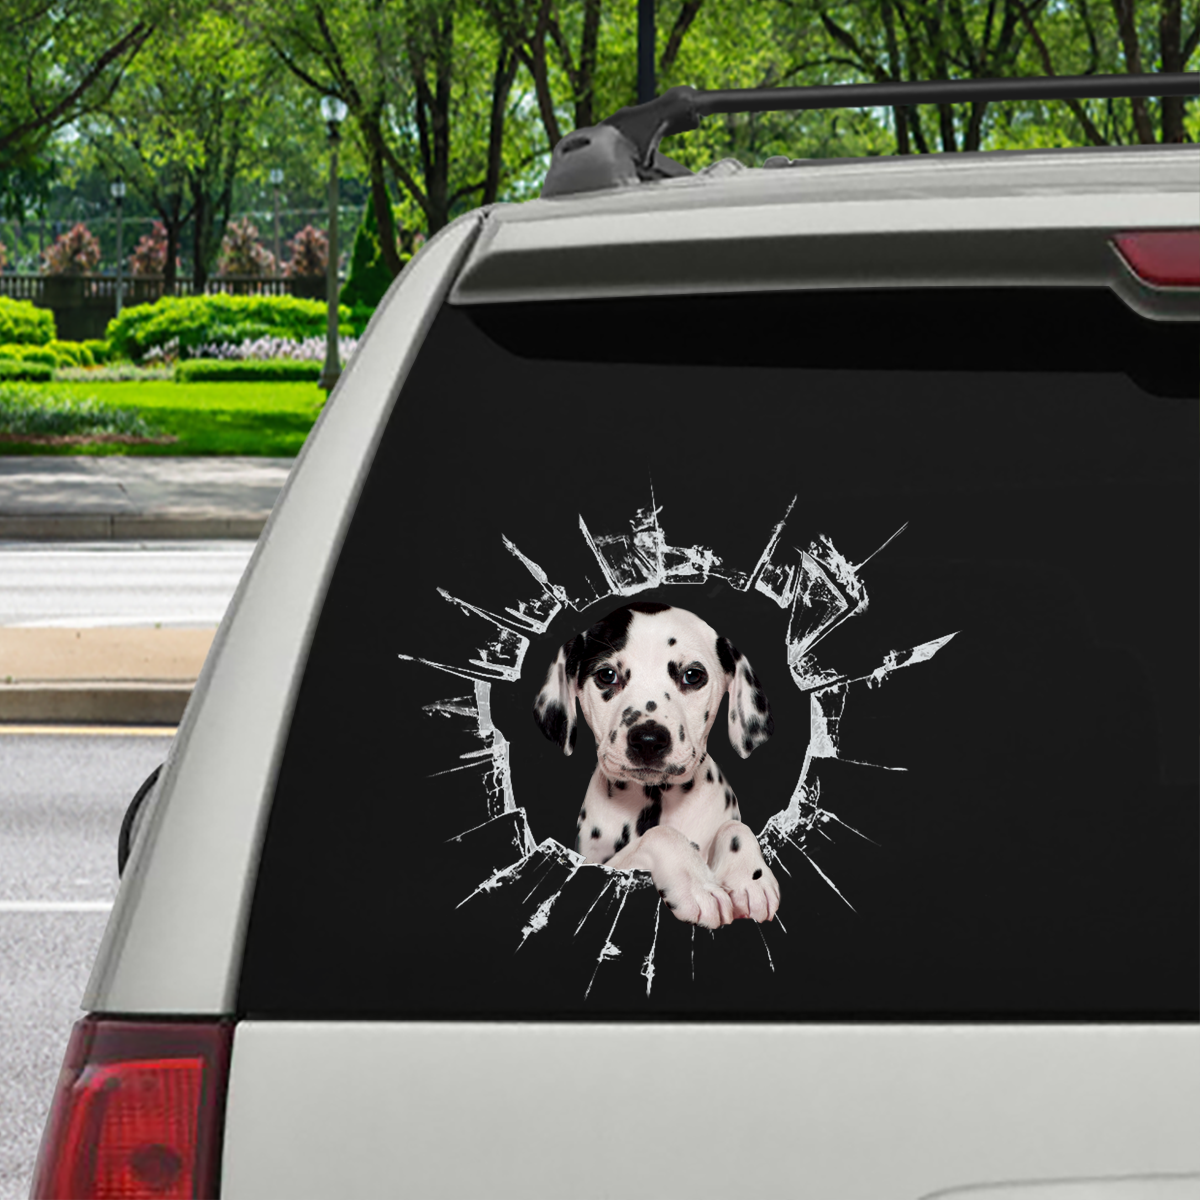 Get In - It's Time For Shopping - Dalmatian Car Sticker V1